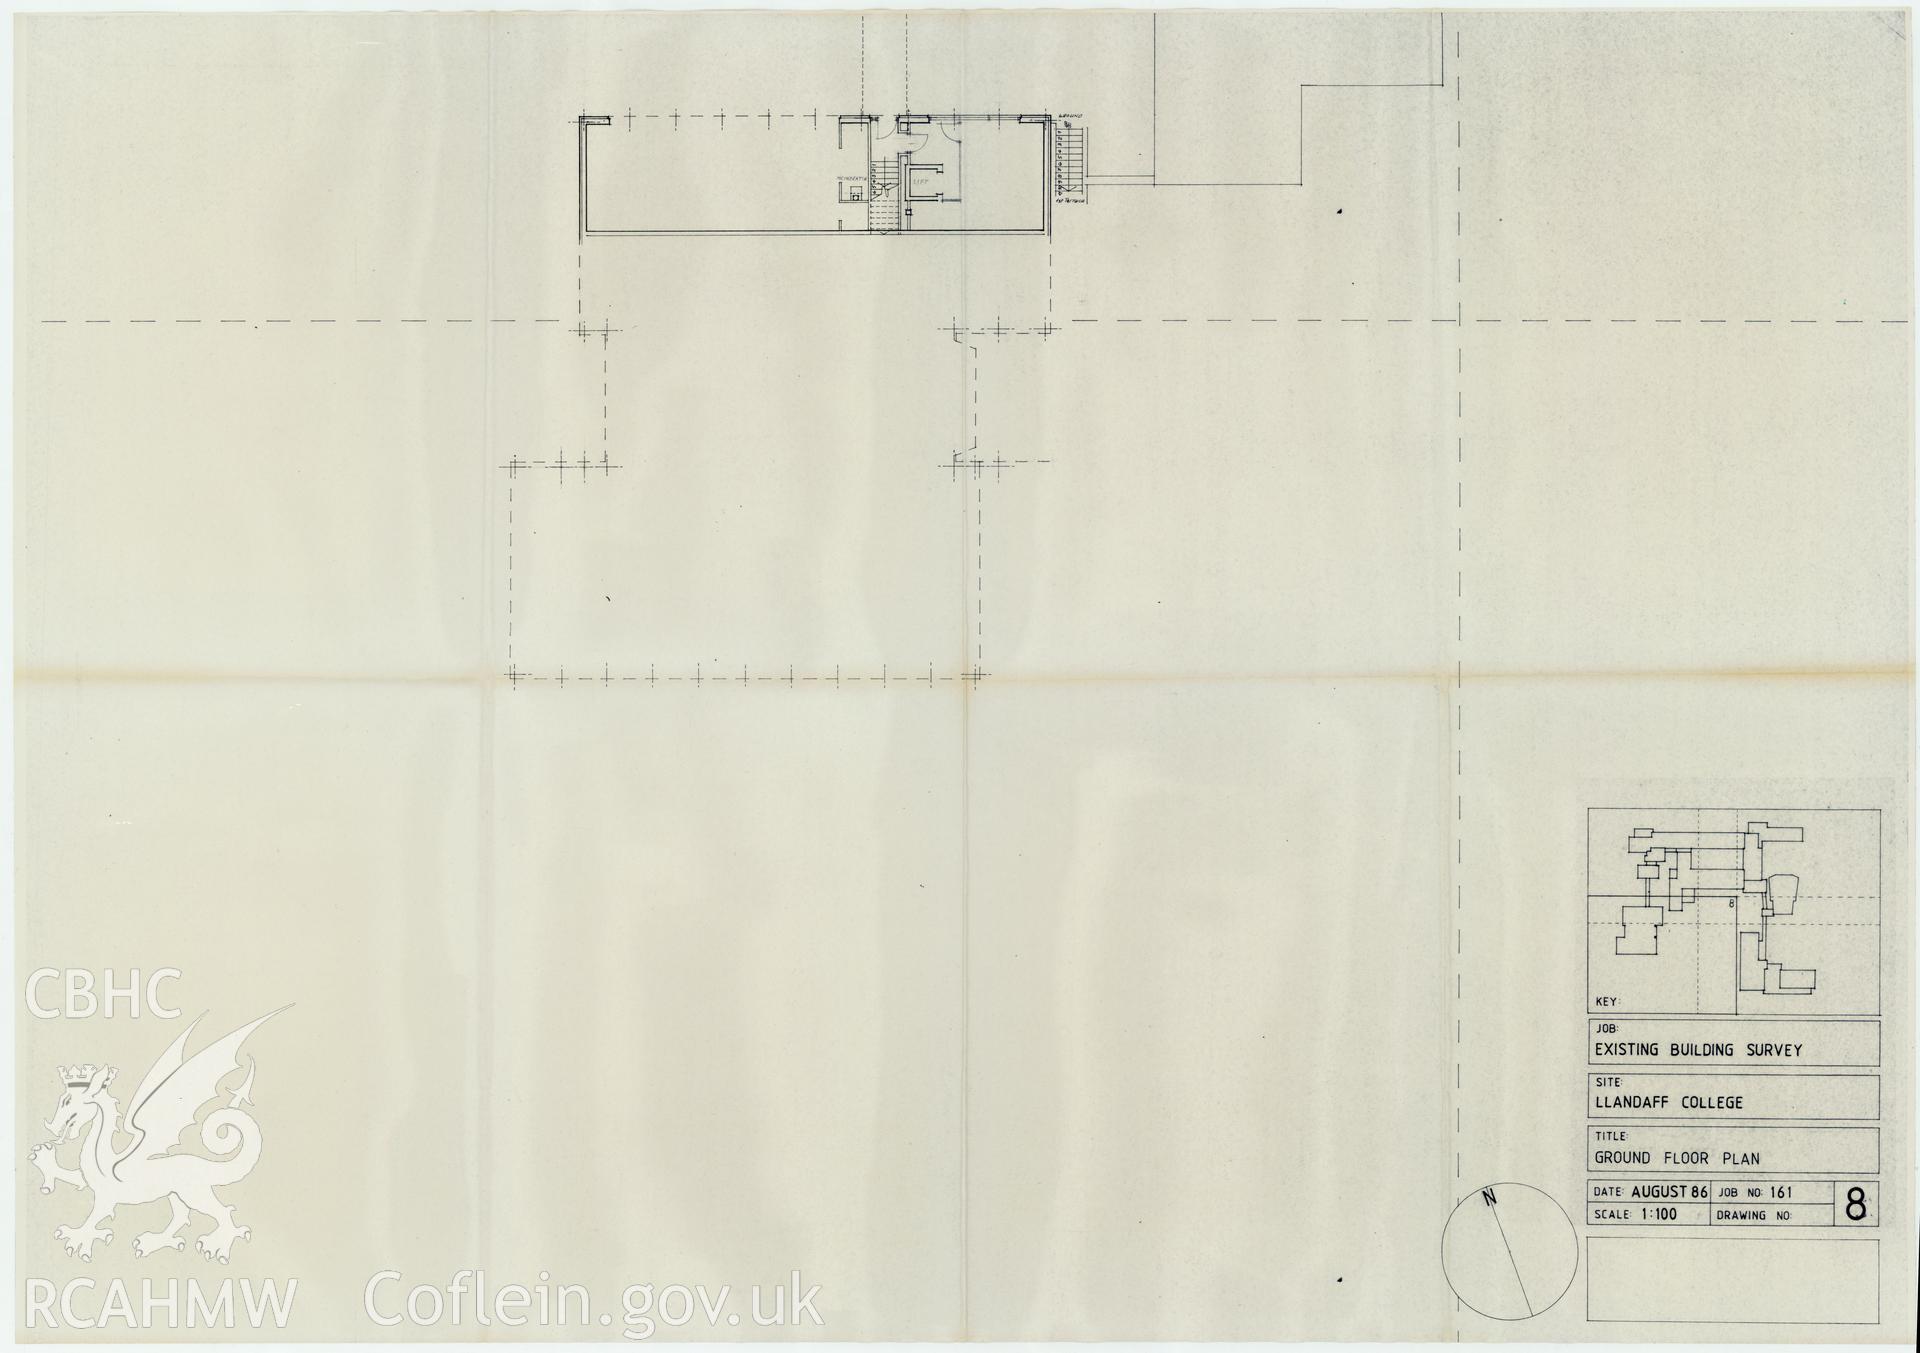 Plan of the ground floor of Llandaff College, Cardiff. The existing building survey, August 1986, No 8.